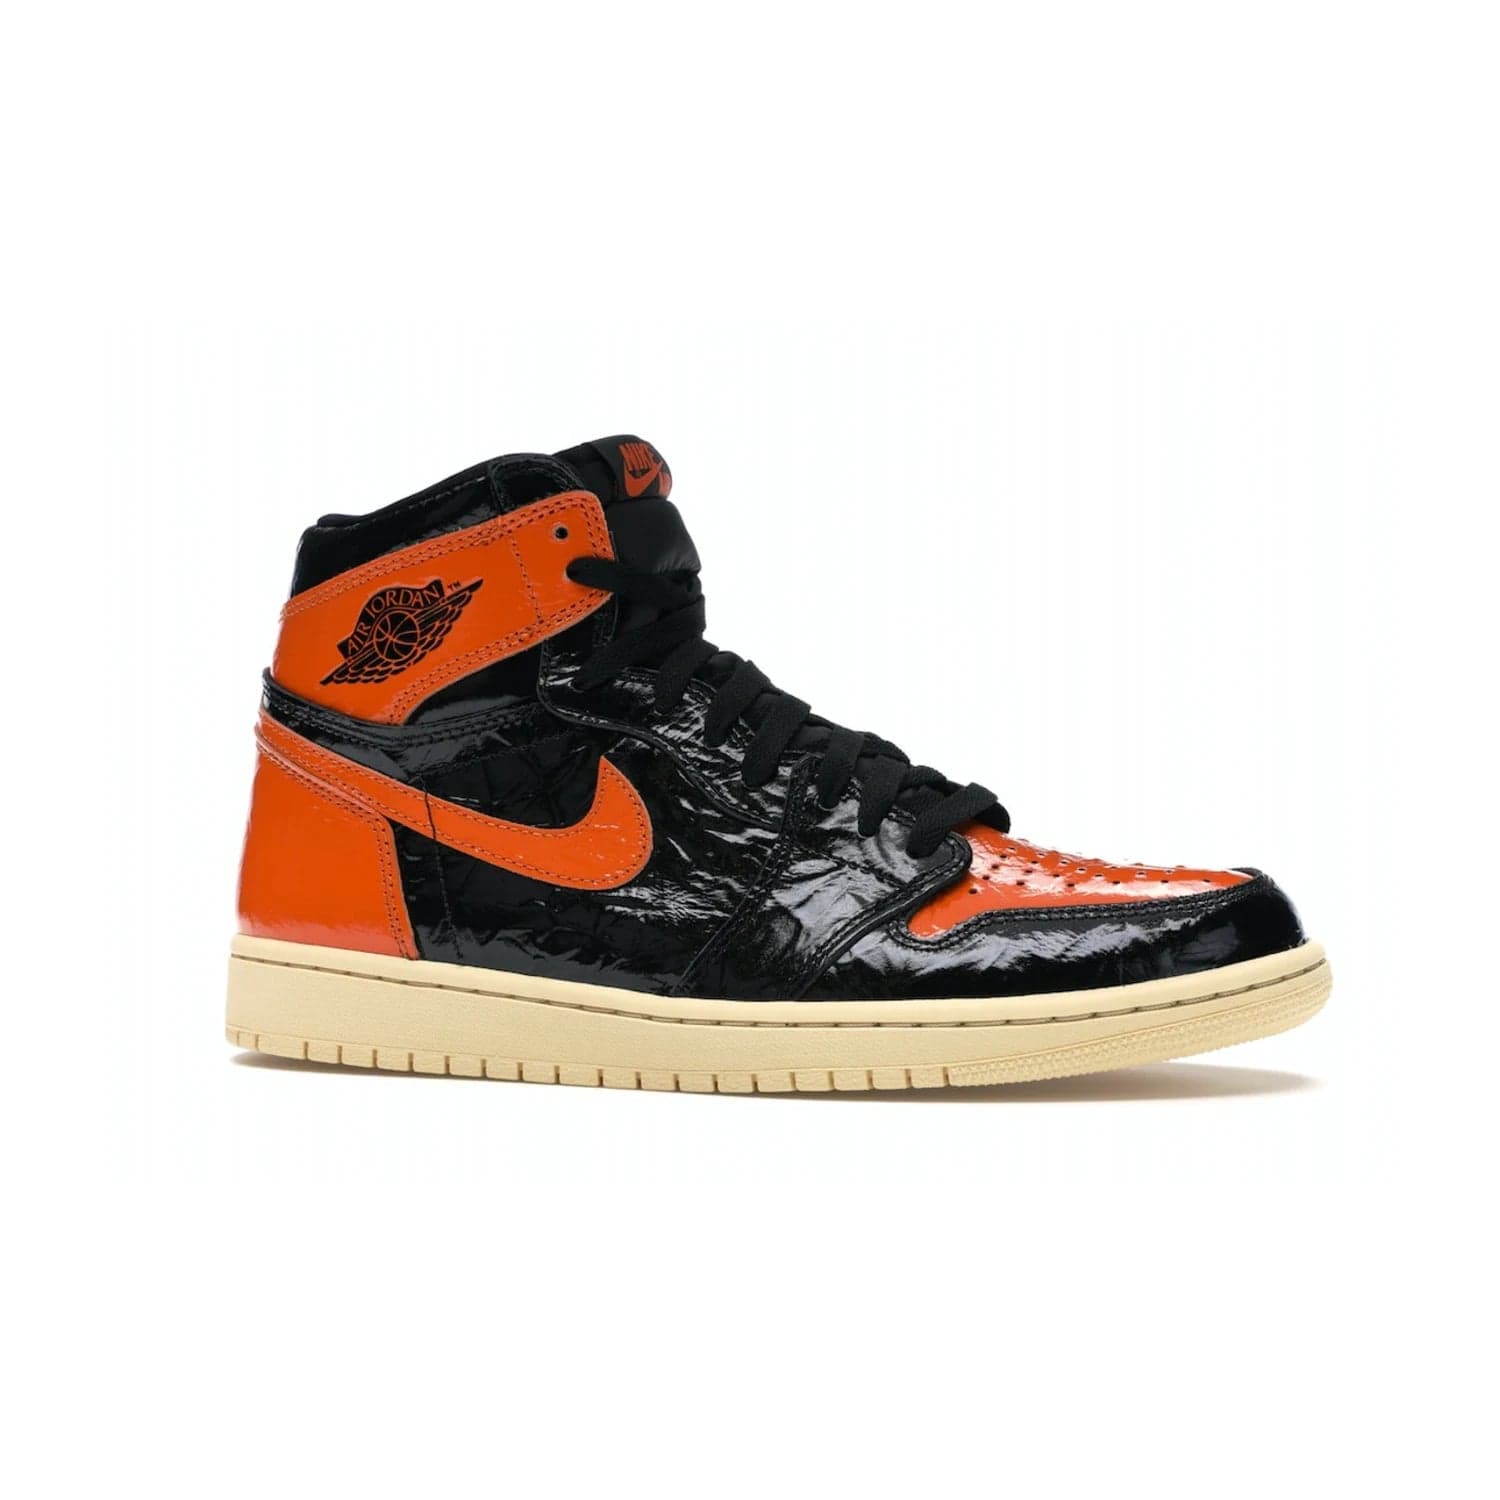 Jordan 1 Retro High Shattered Backboard 3.0 - Image 3 - Only at www.BallersClubKickz.com - #
Jordan 1 Retro High Shattered Backboard 3.0: the perfect blend of modern style and nostalgic flair featuring an orange and black crinkled patent leather upper and yellowed vanilla outsole. Get these exclusive sneakers released in October of 2019!